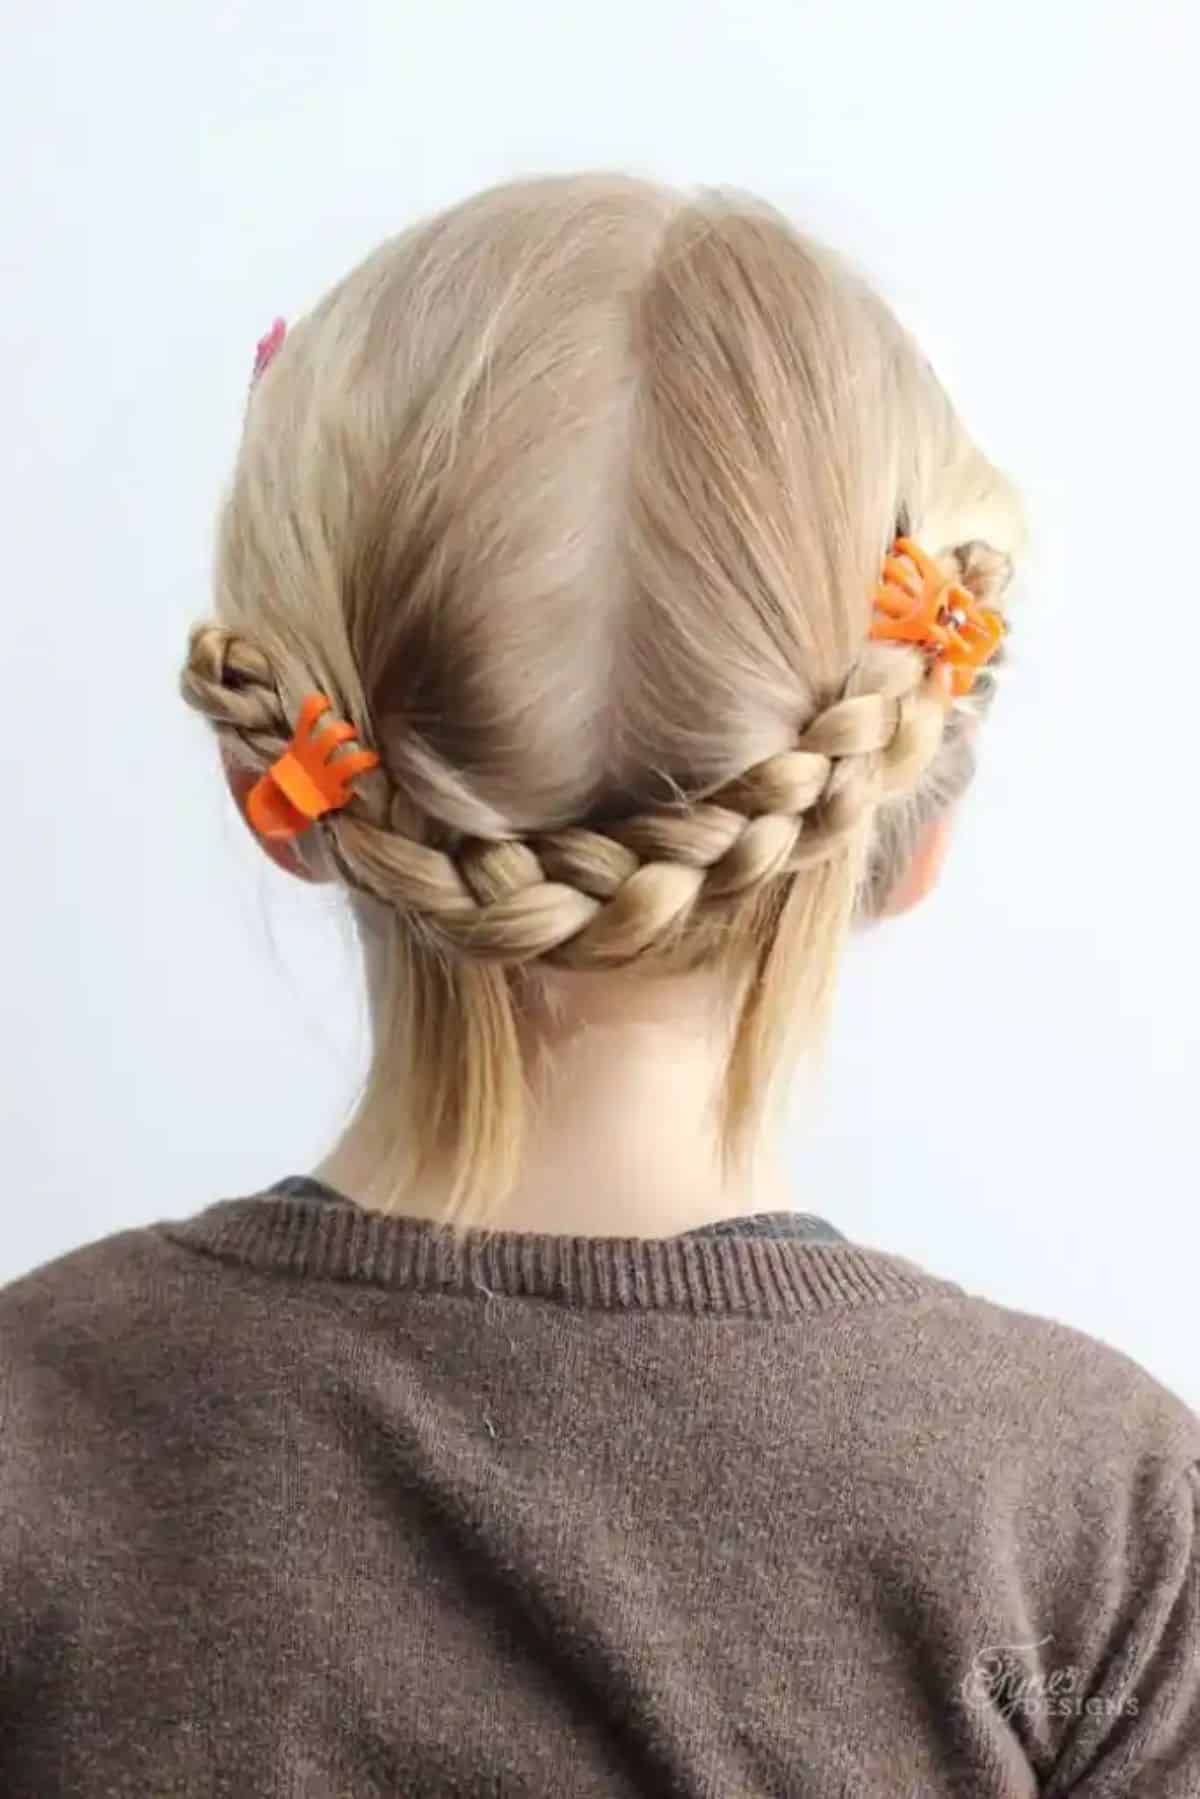 Young girl with a ponytail and orange hair clips.